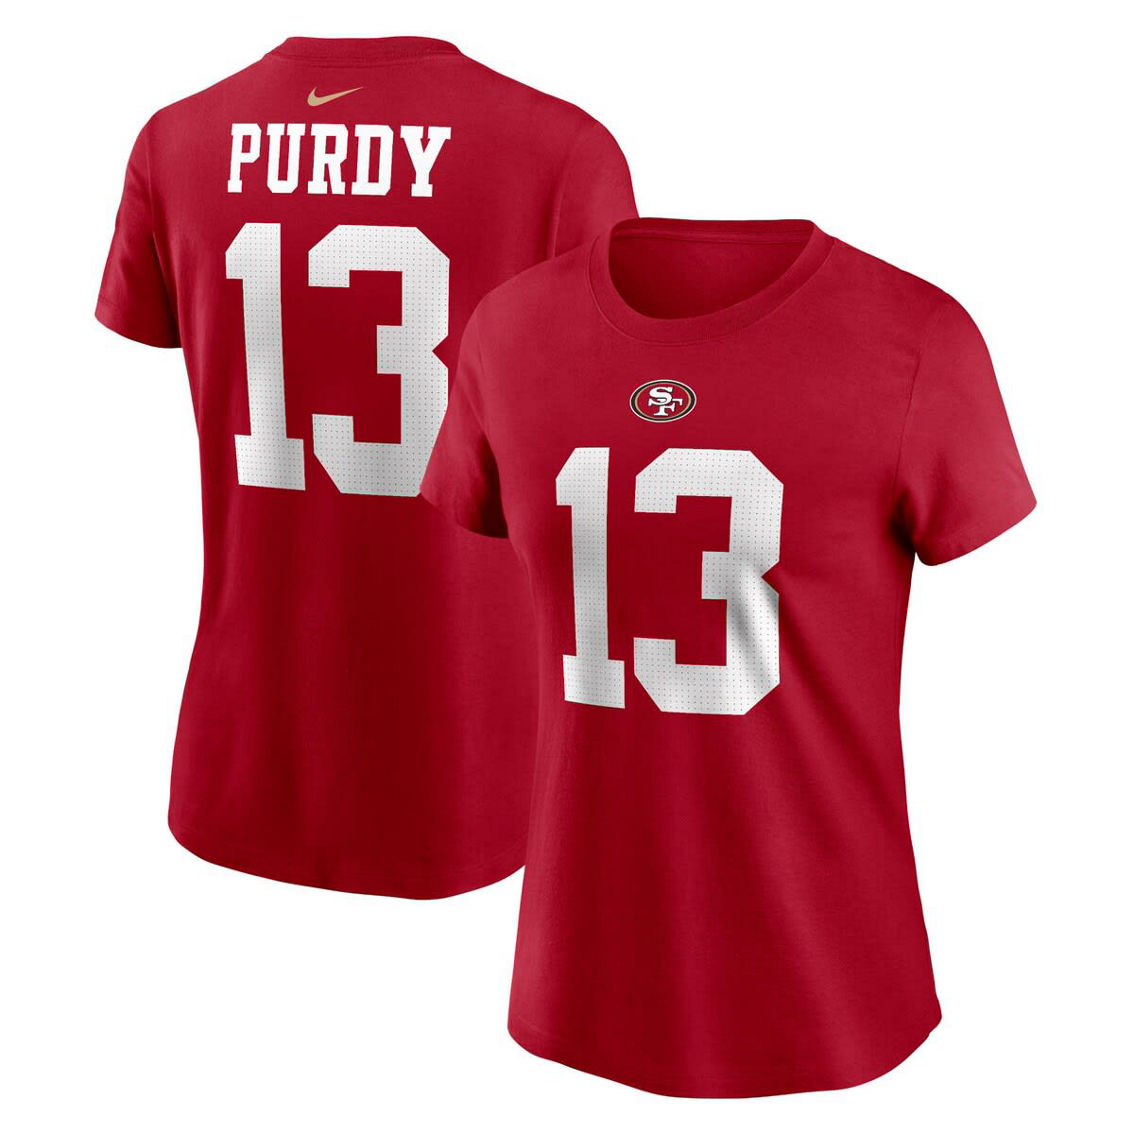 Nike Women's Brock Purdy Scarlet San Francisco 49ers Player Name & Number T-Shirt - Image 2 of 4